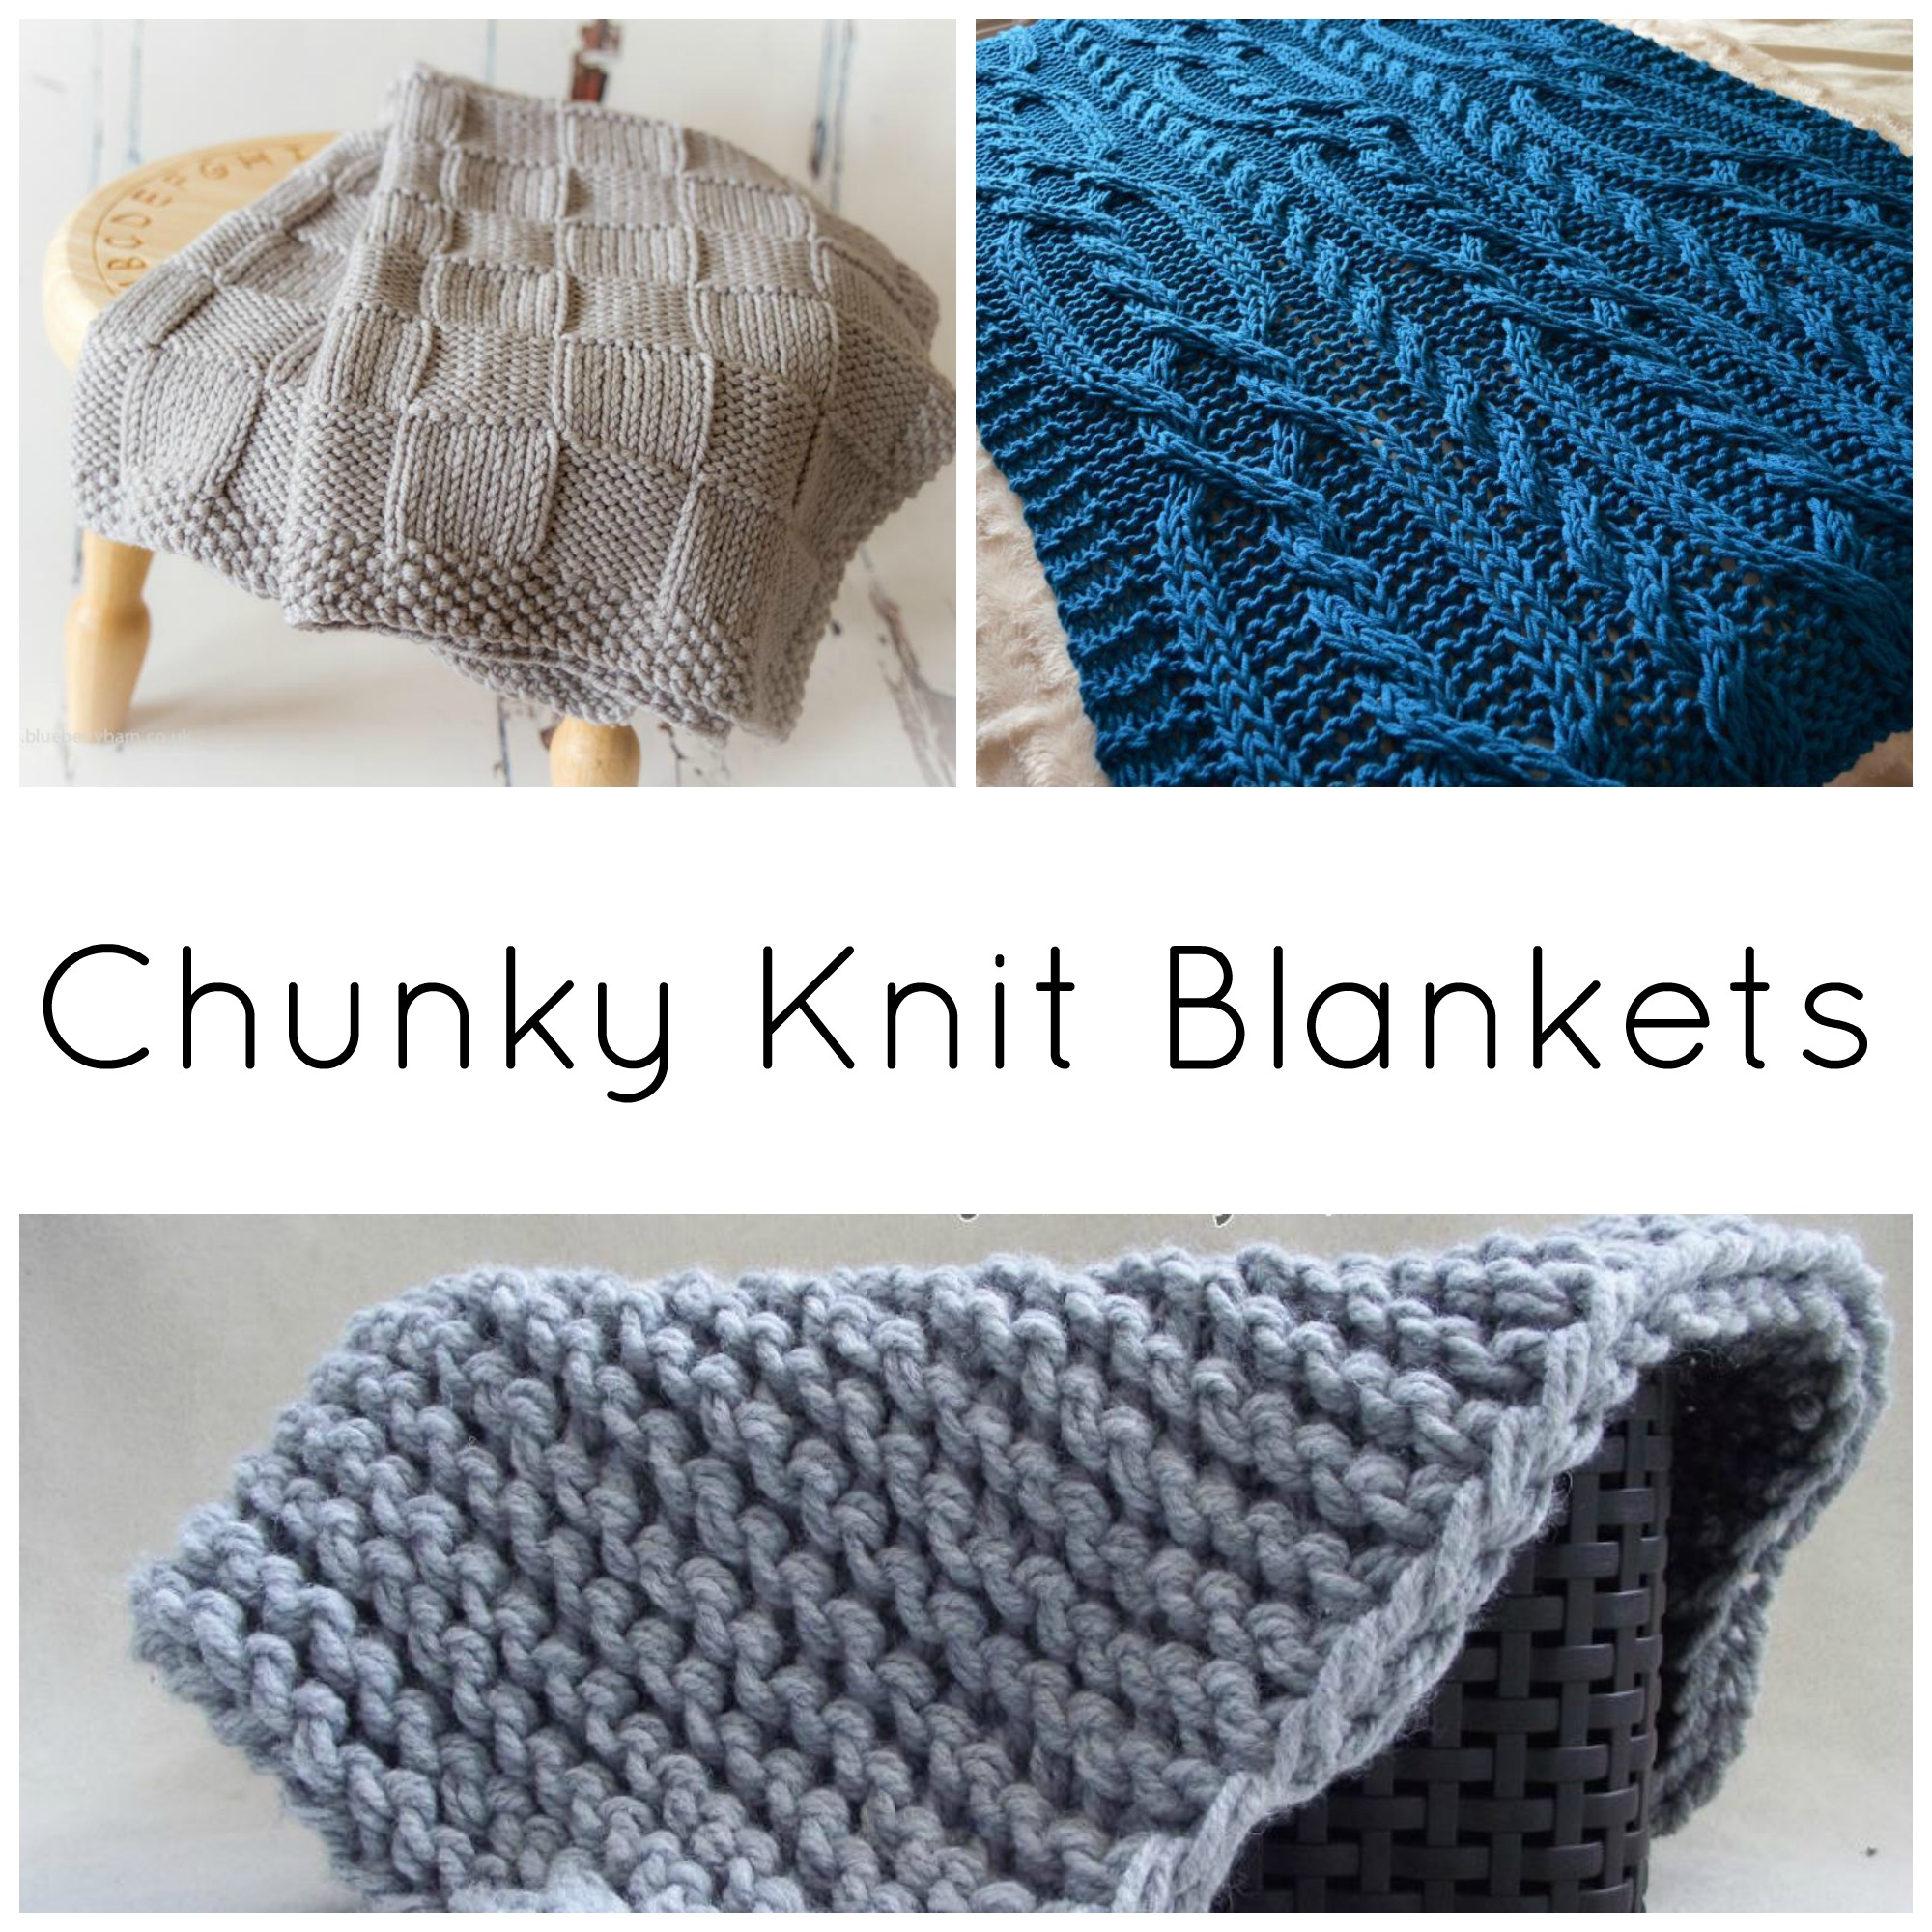 Chunky Knit Blanket Pattern Knit Blanket 10 Chunky Knit Blankets You Can Crochet And Knitting